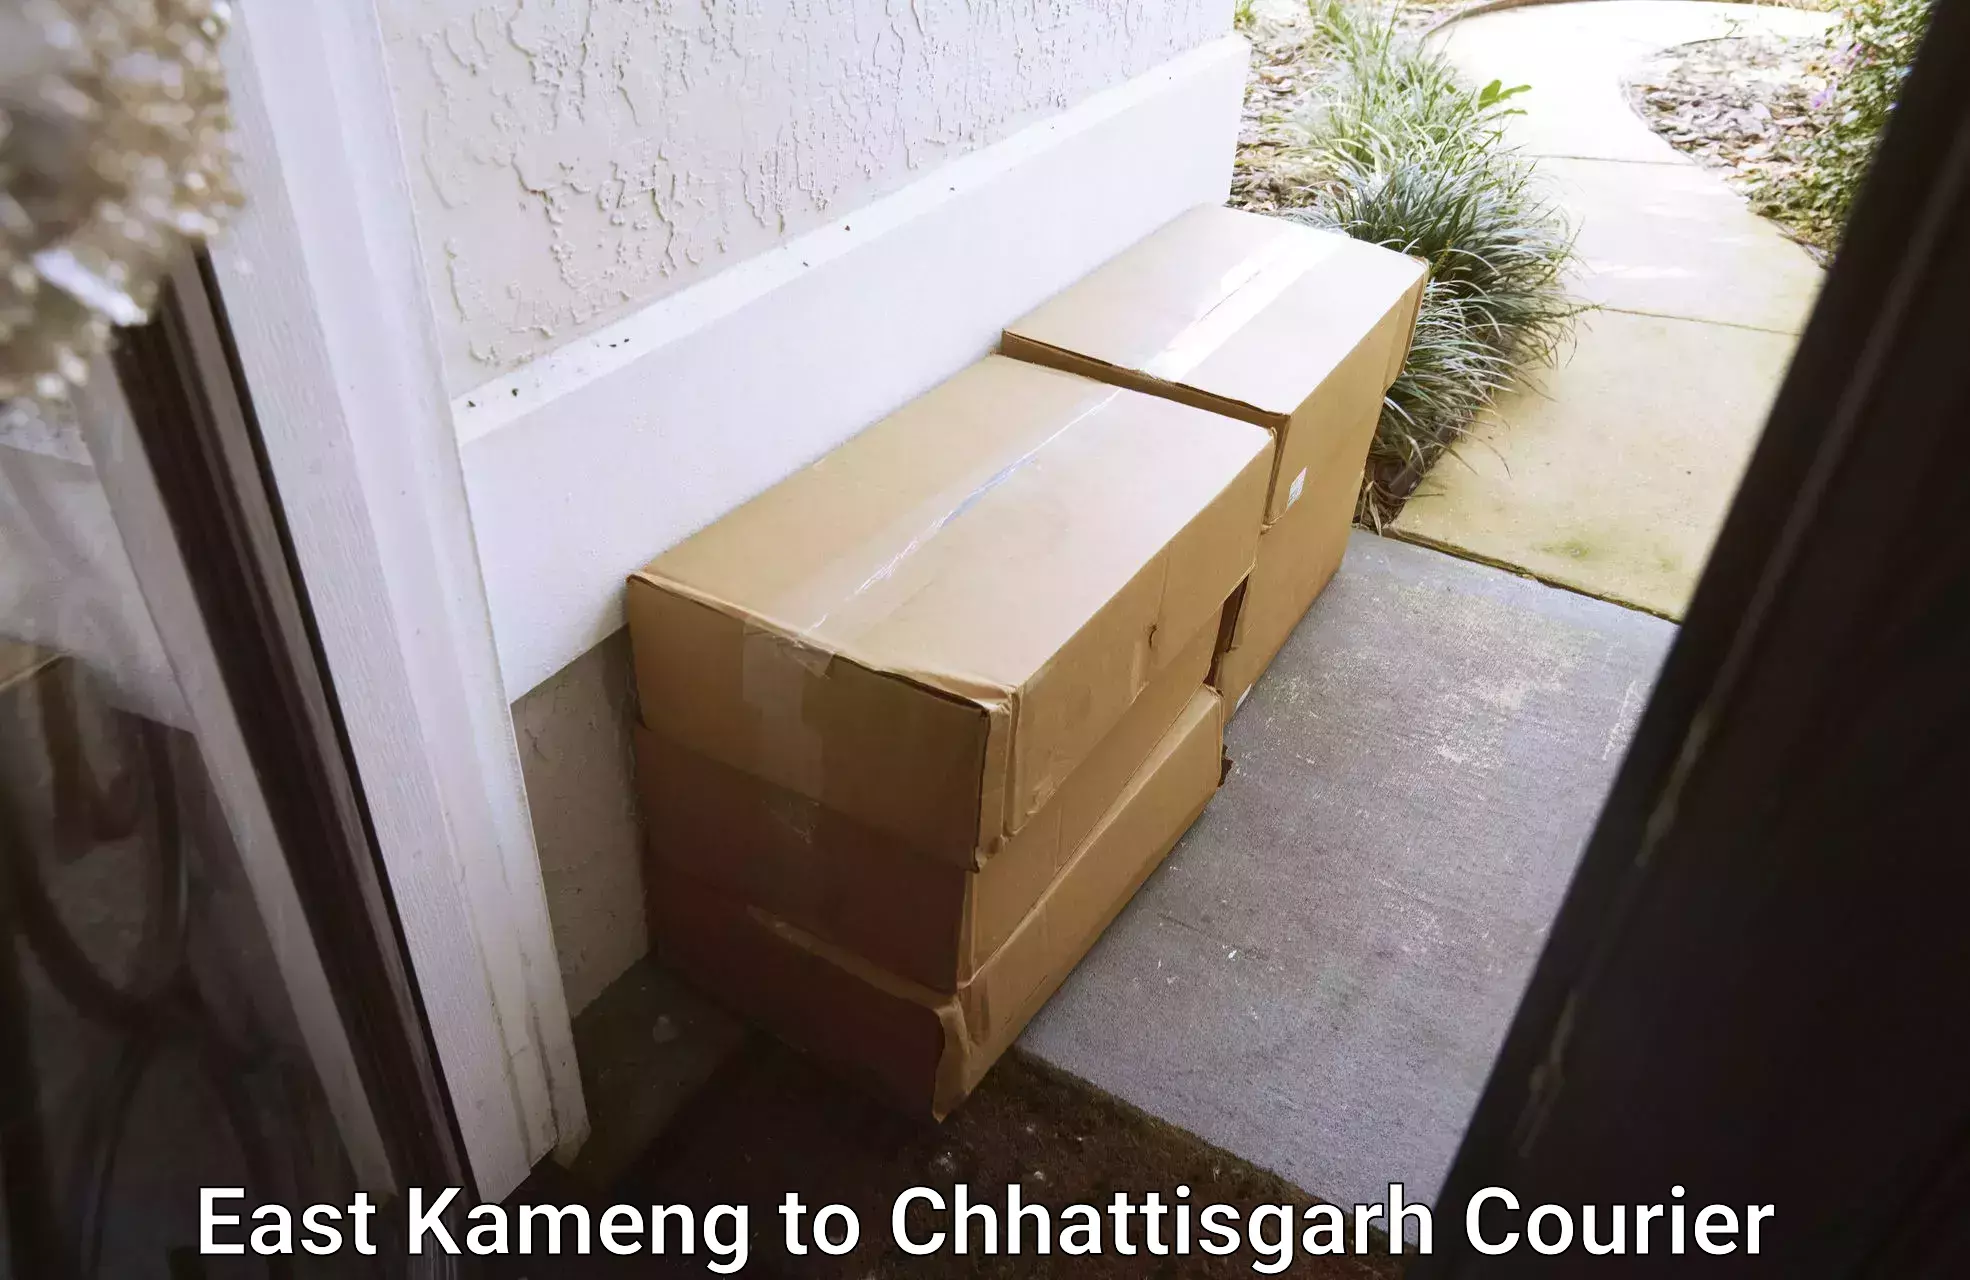 Next-day delivery options in East Kameng to Chhattisgarh